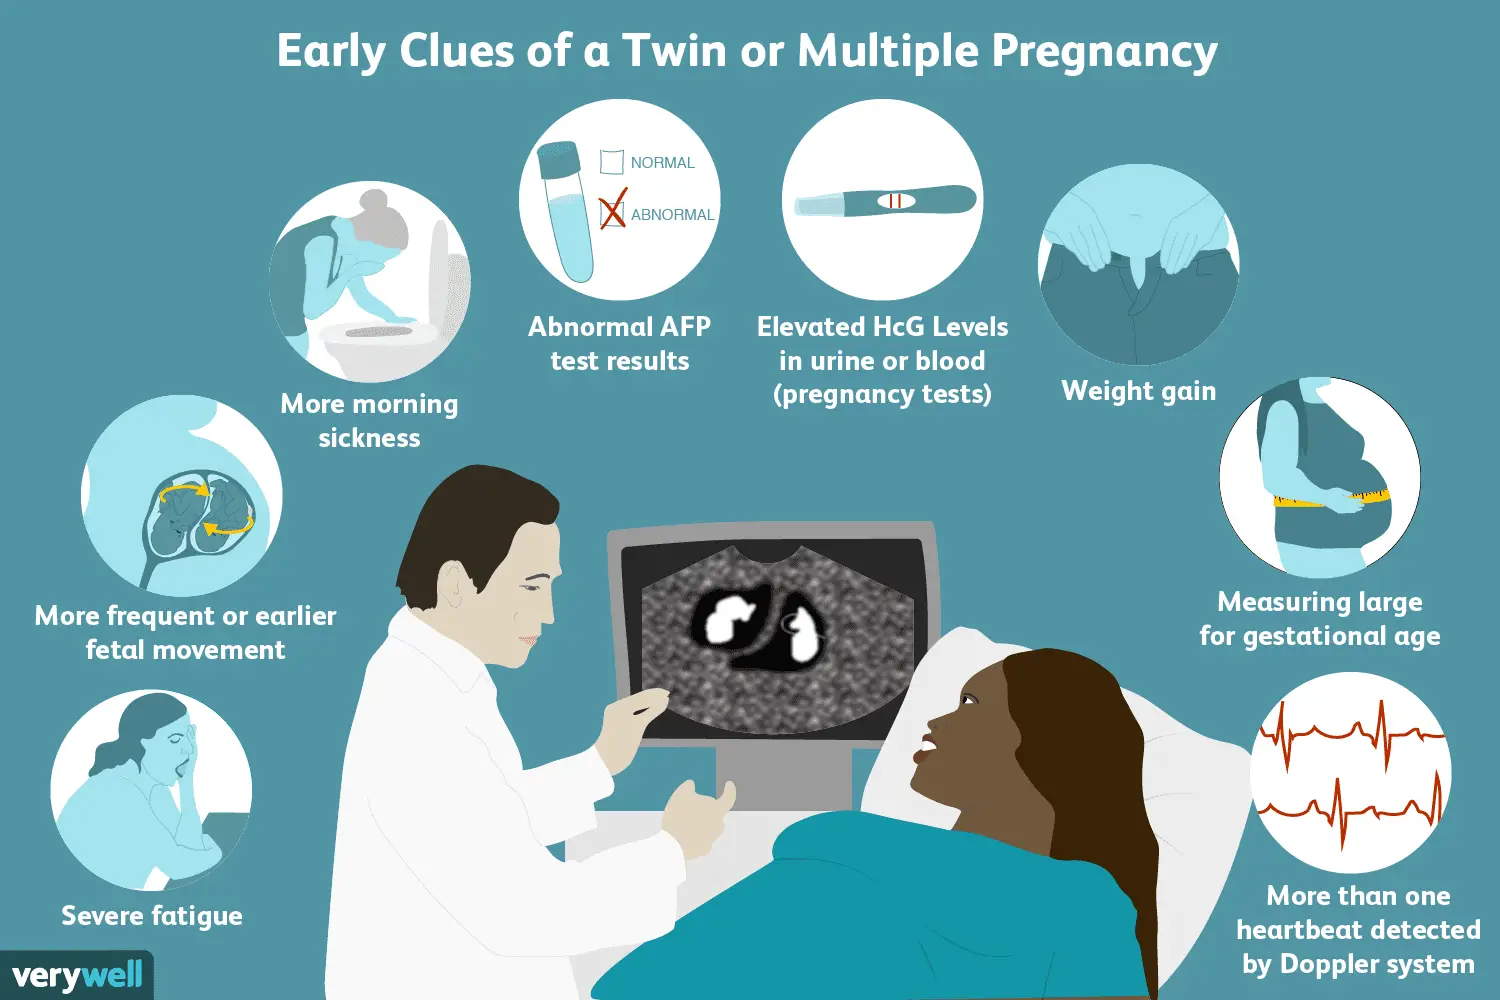 Signs and Symptoms of a Twin or Multiple Pregnancy